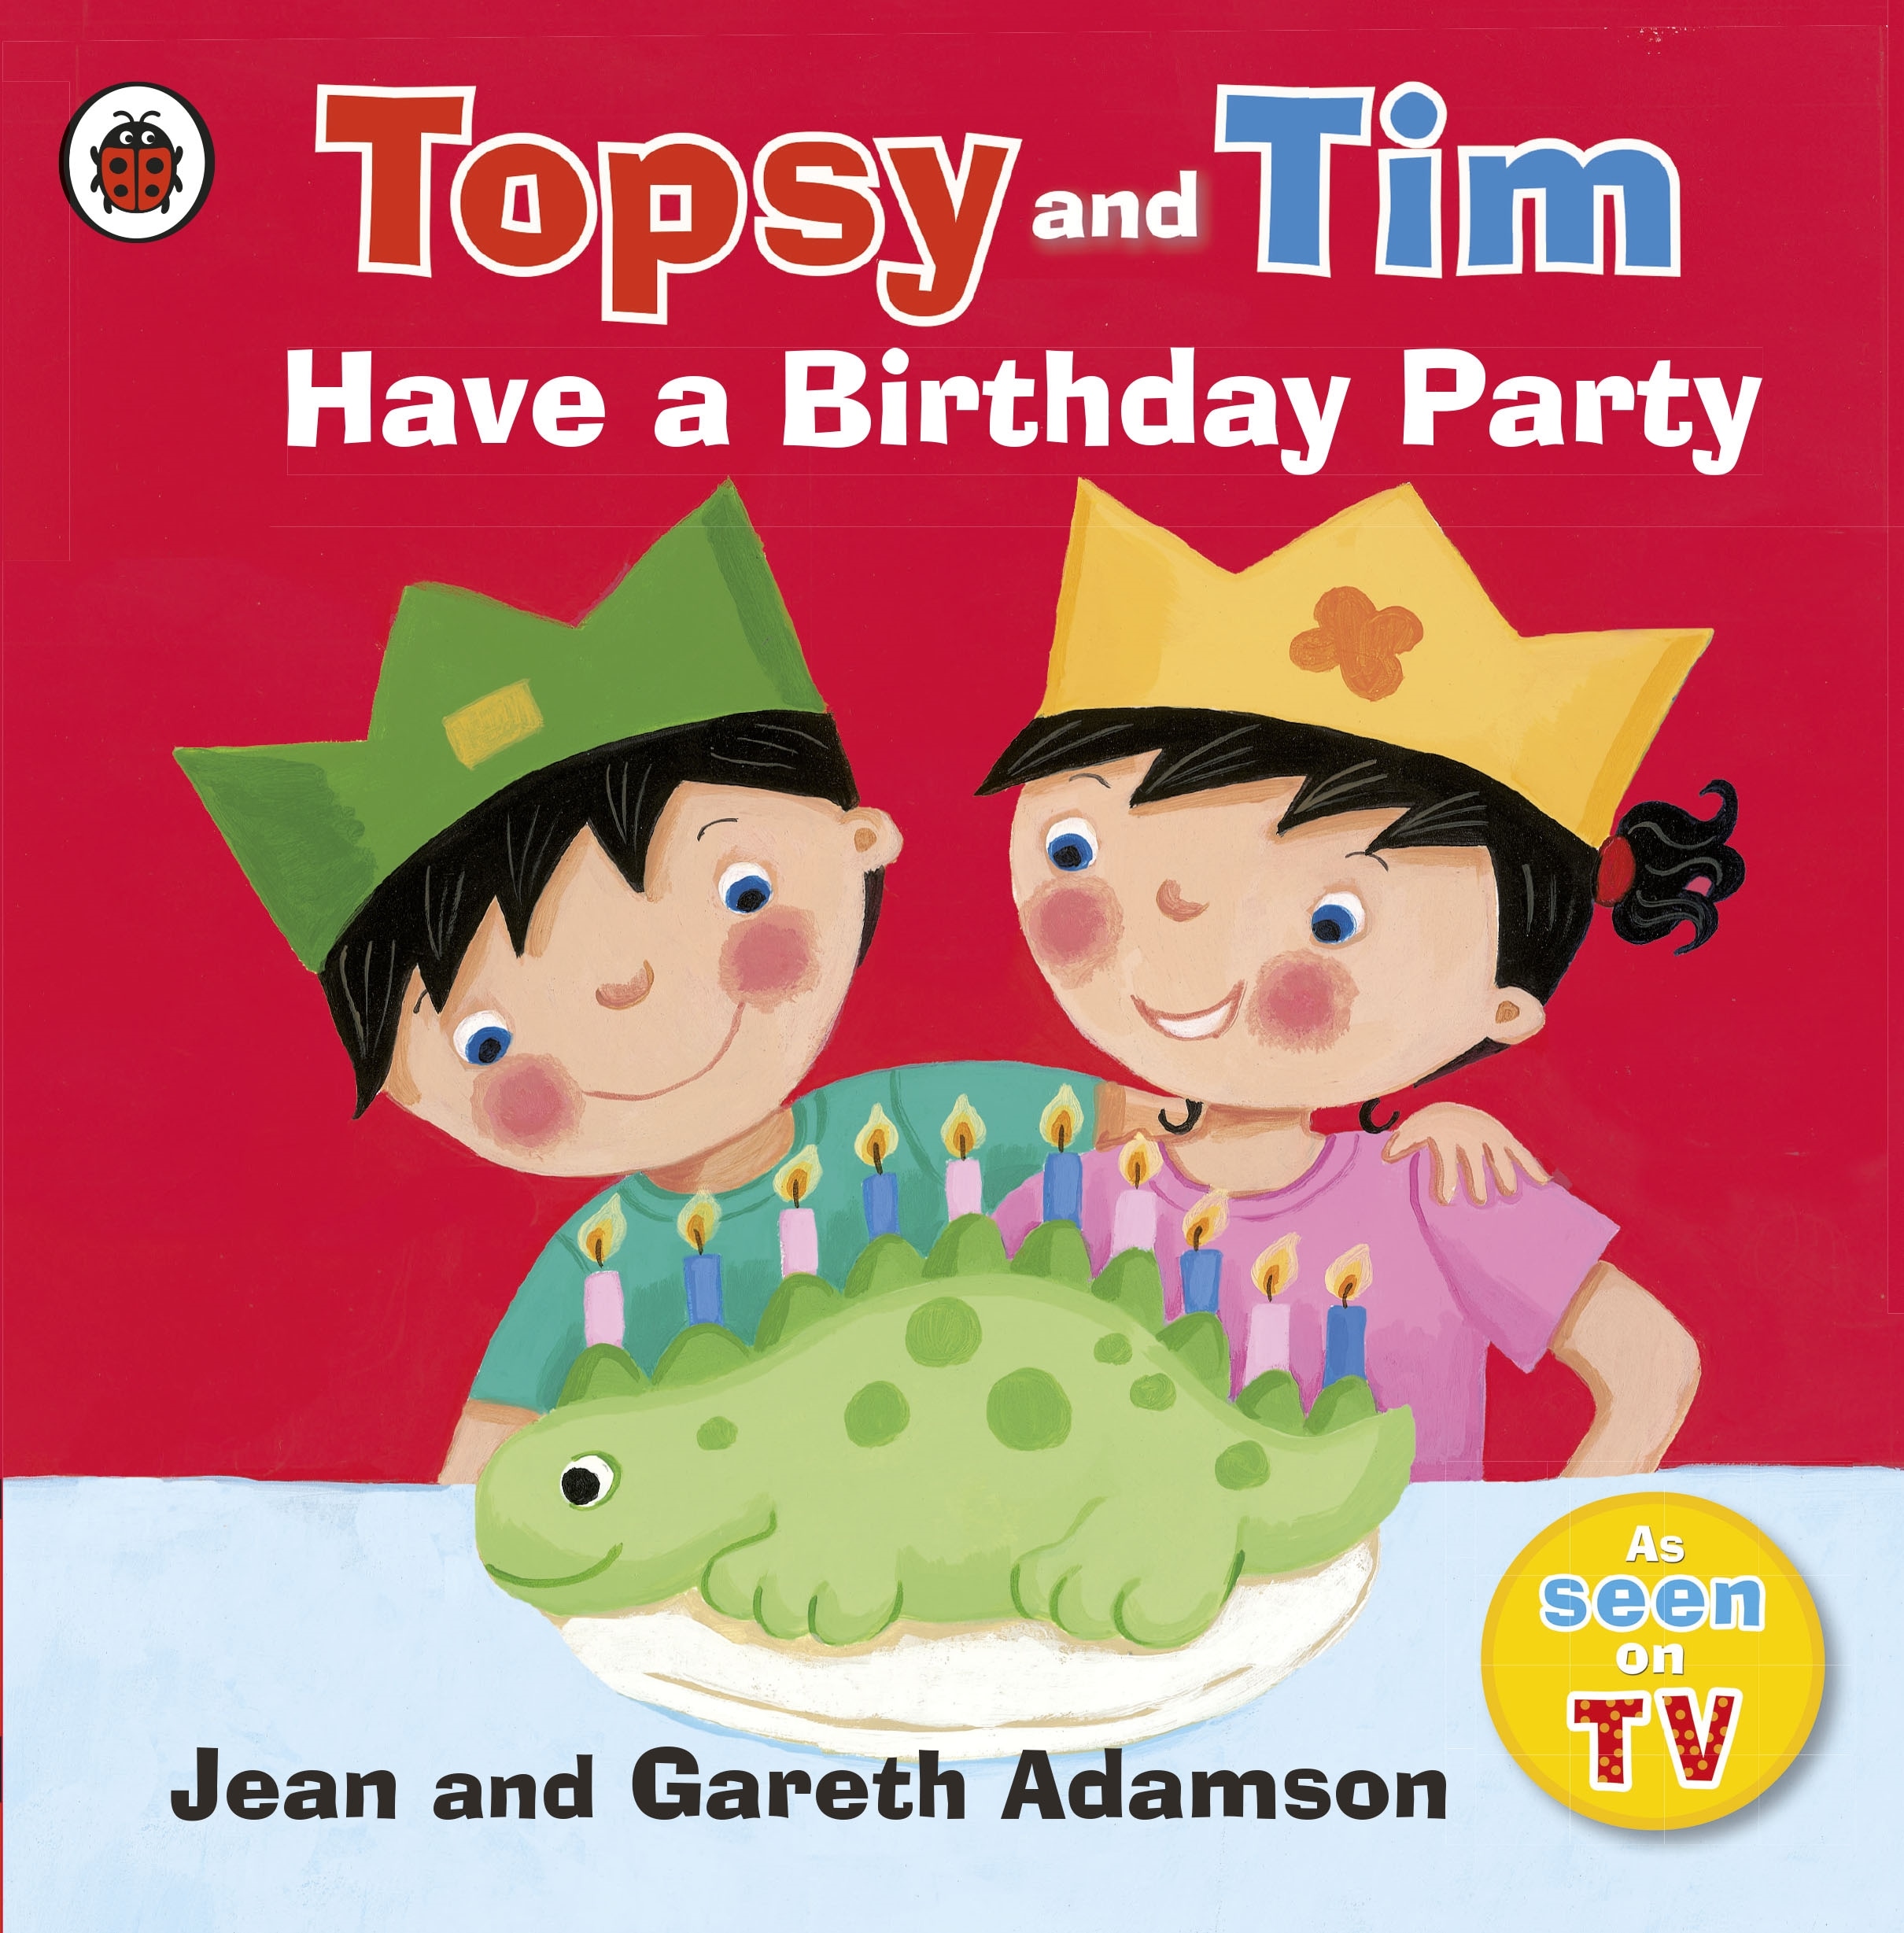 Book “Topsy and Tim: Have a Birthday Party” by Jean Adamson — April 2, 2009